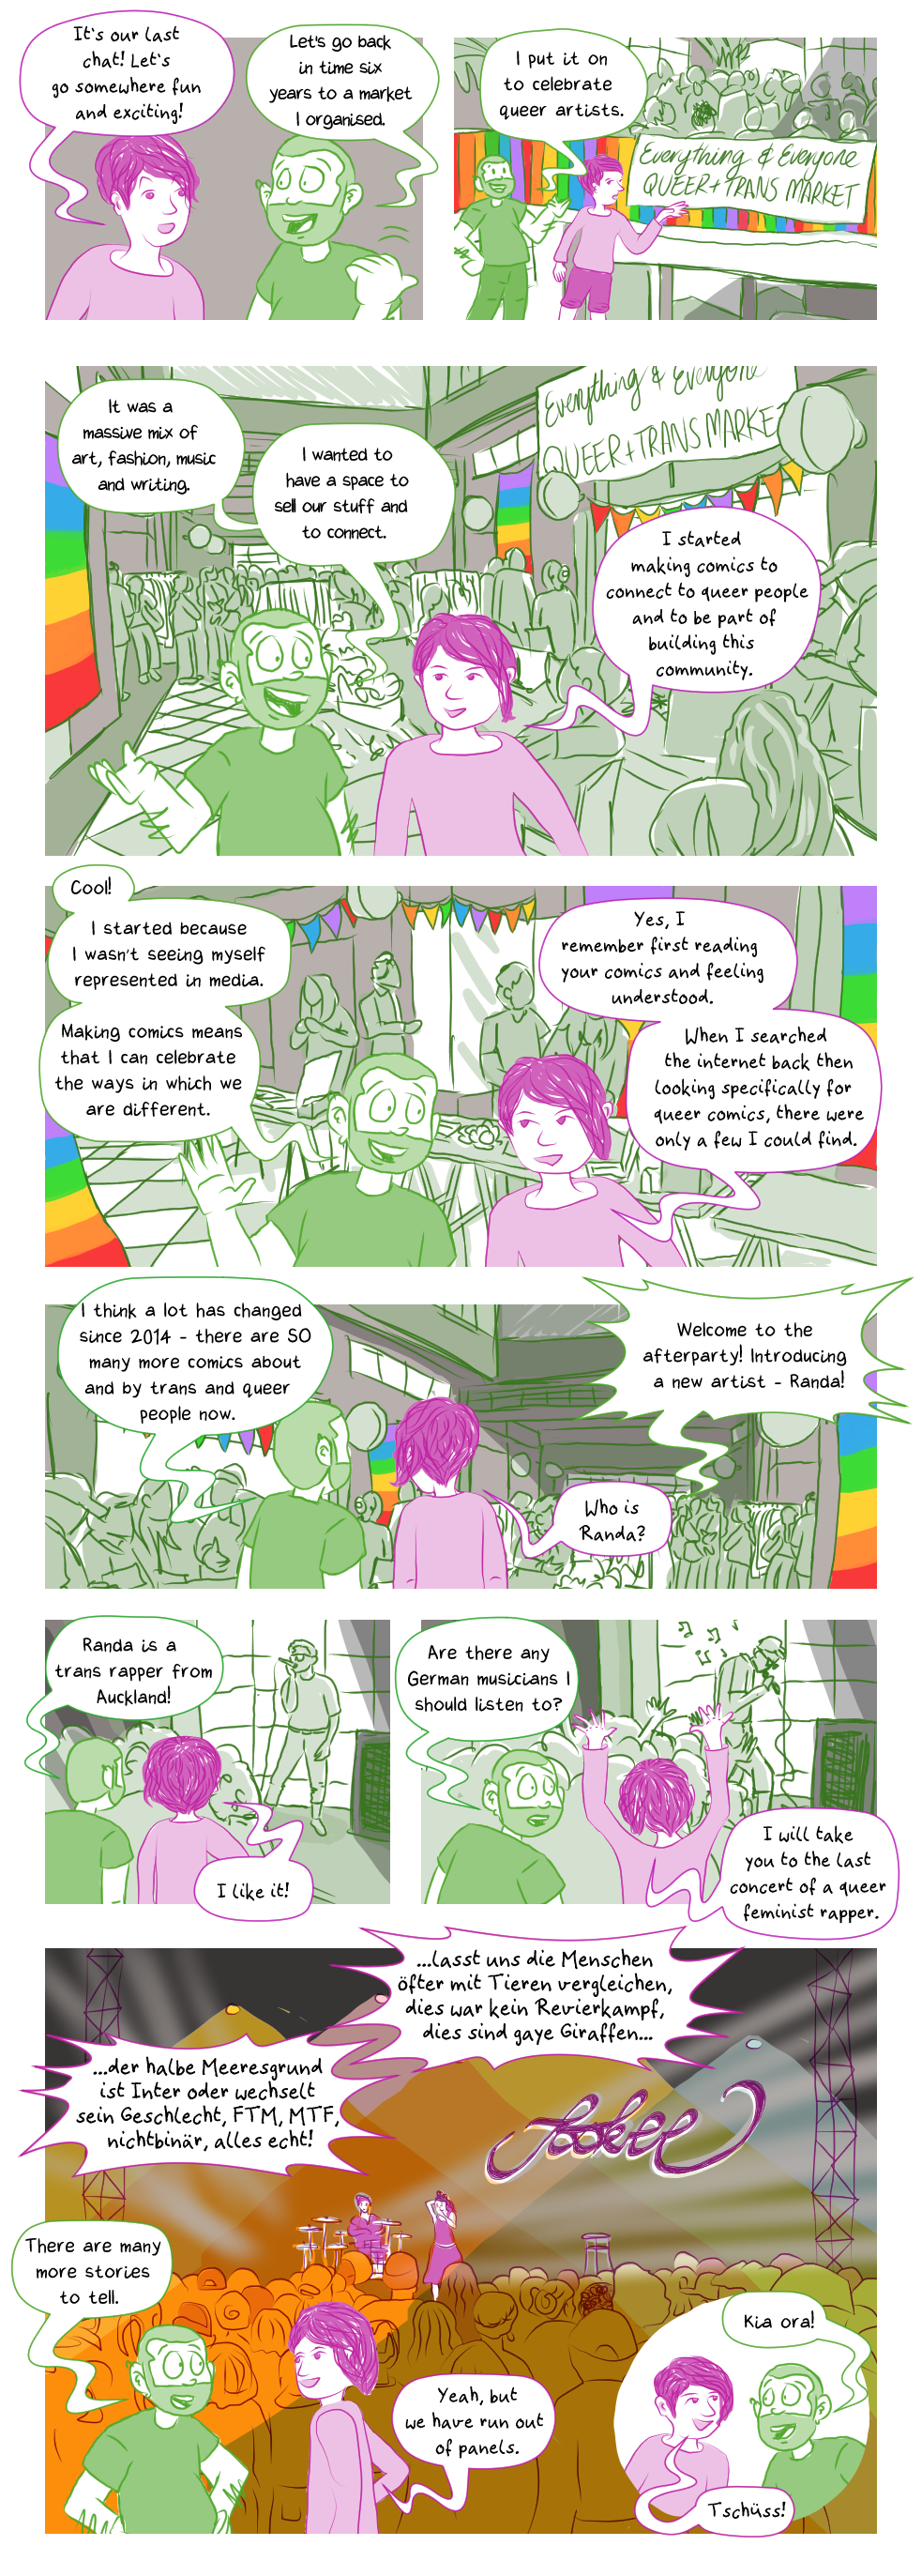 visual comic: Queer Comic Conversation - December: Queer Market, scroll down for text-based comic (after annotations)